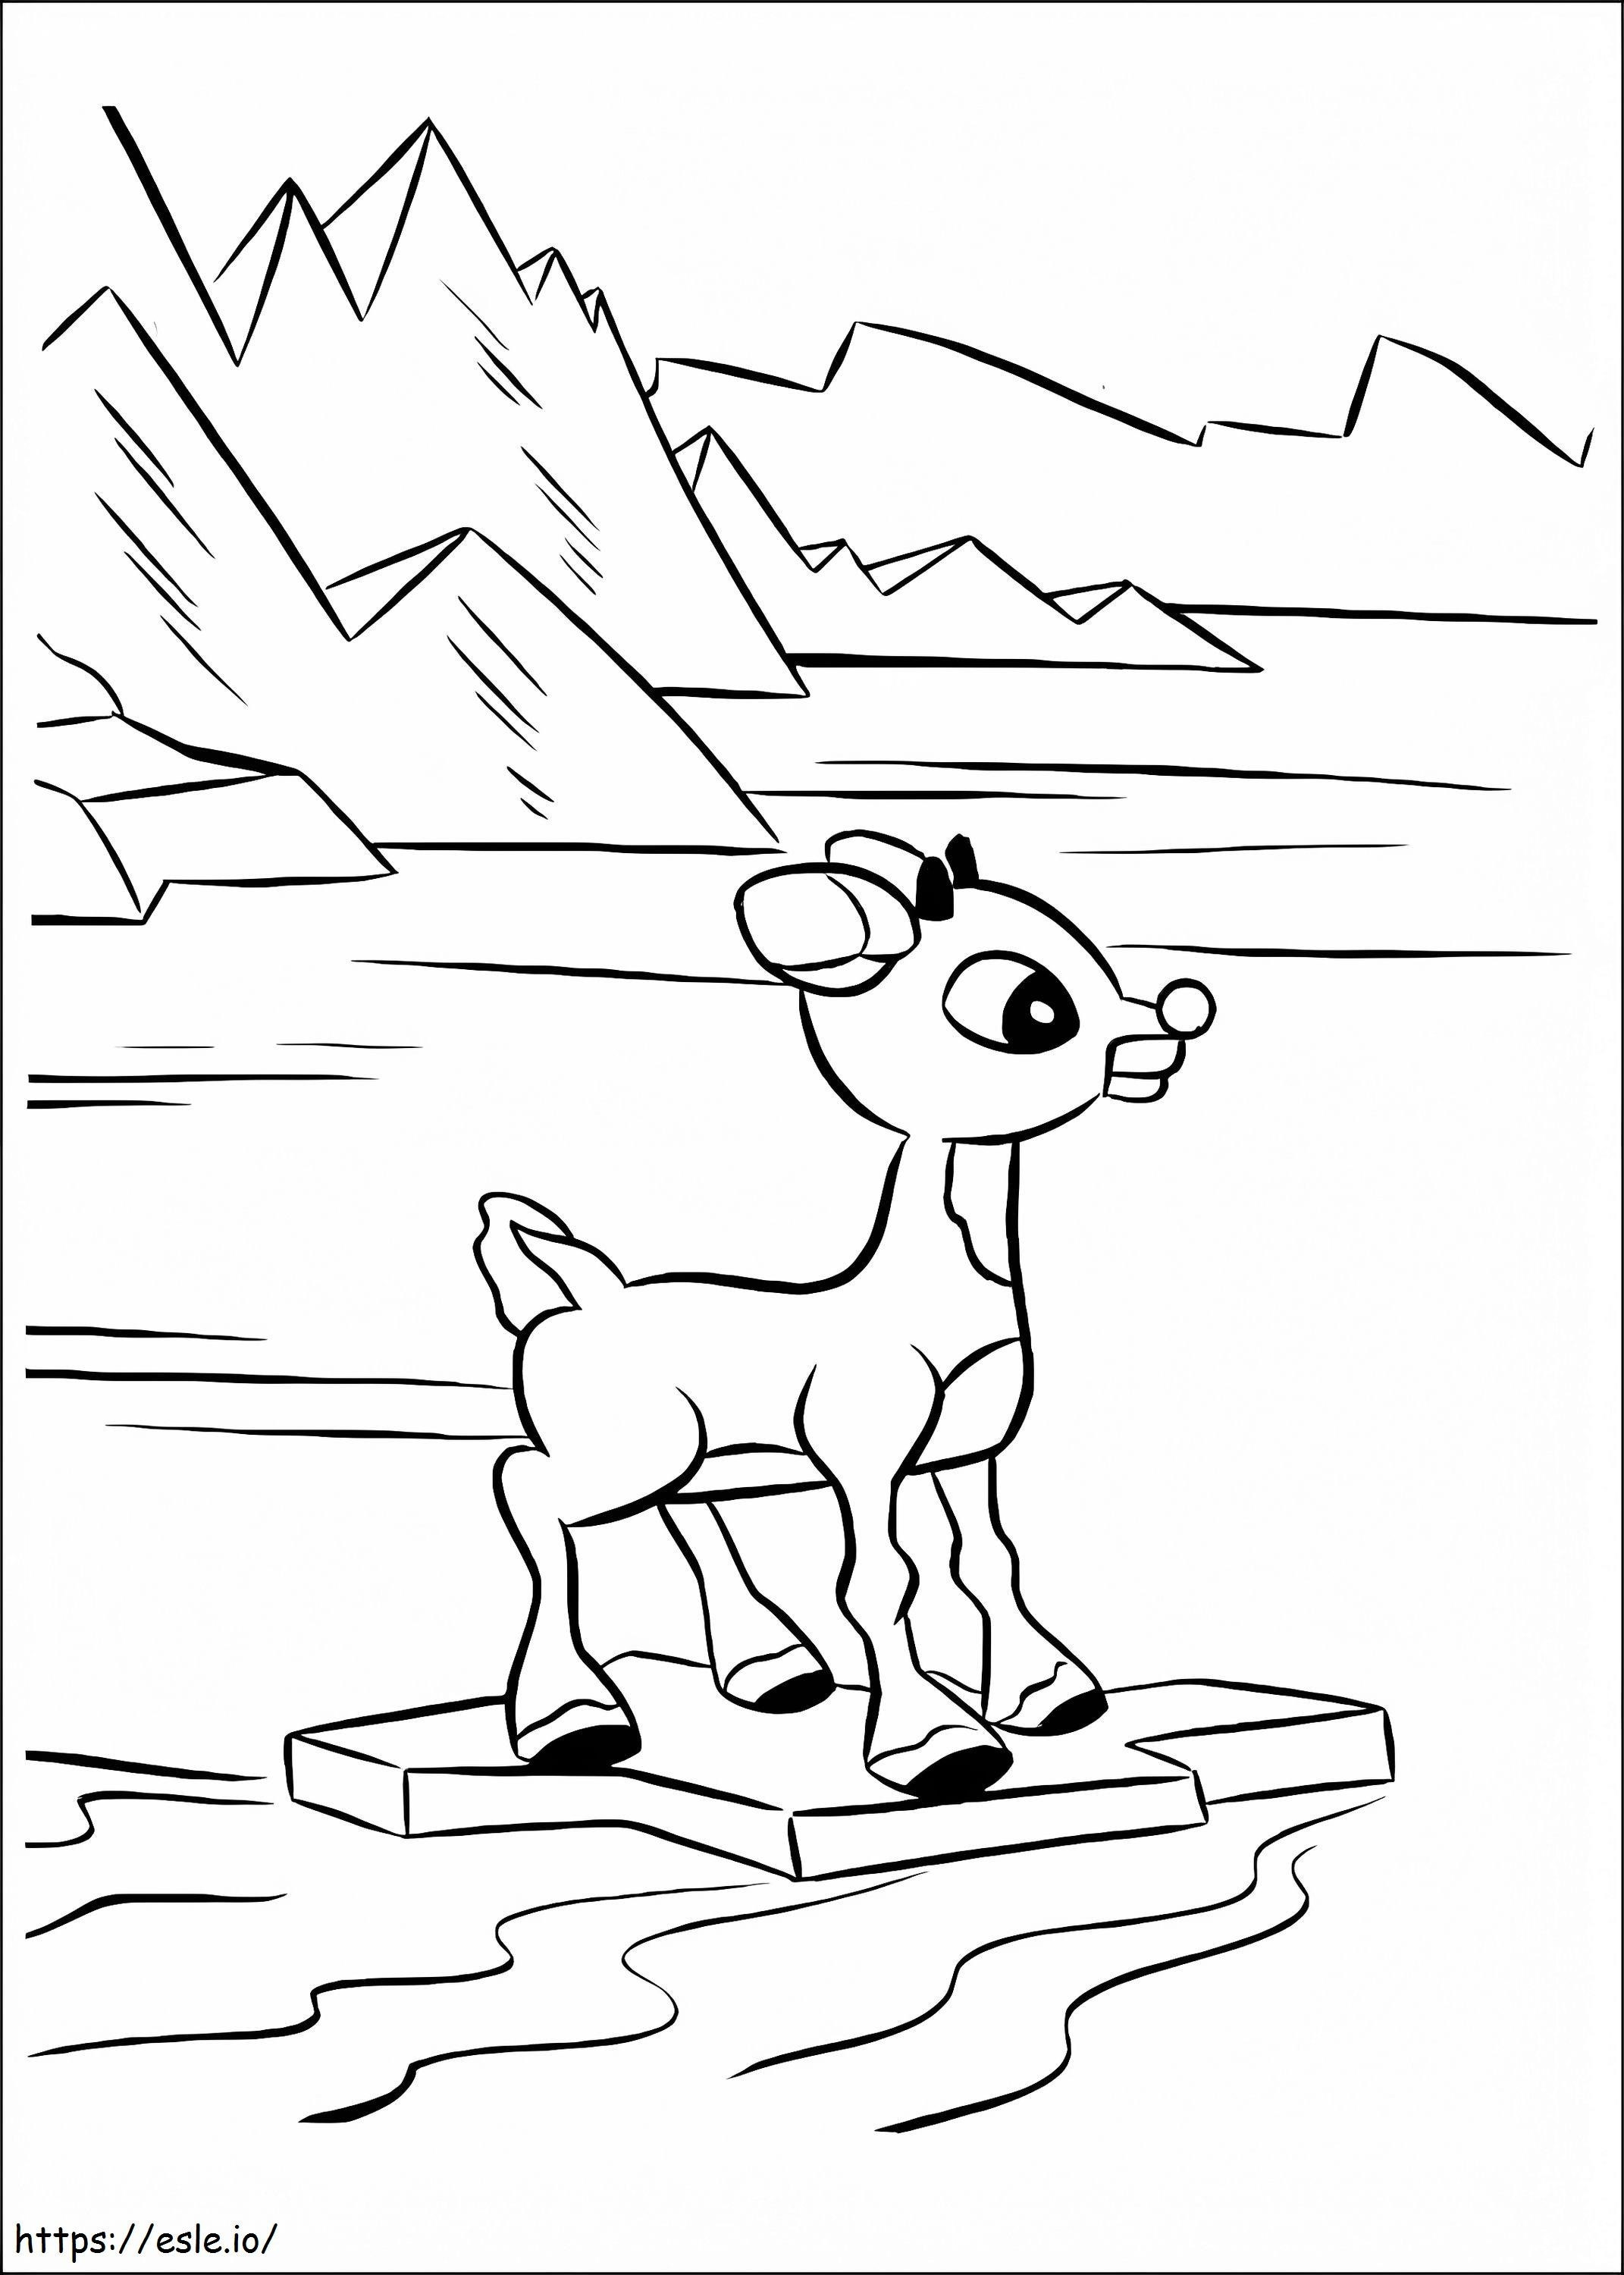 Lonely Rudolph coloring page